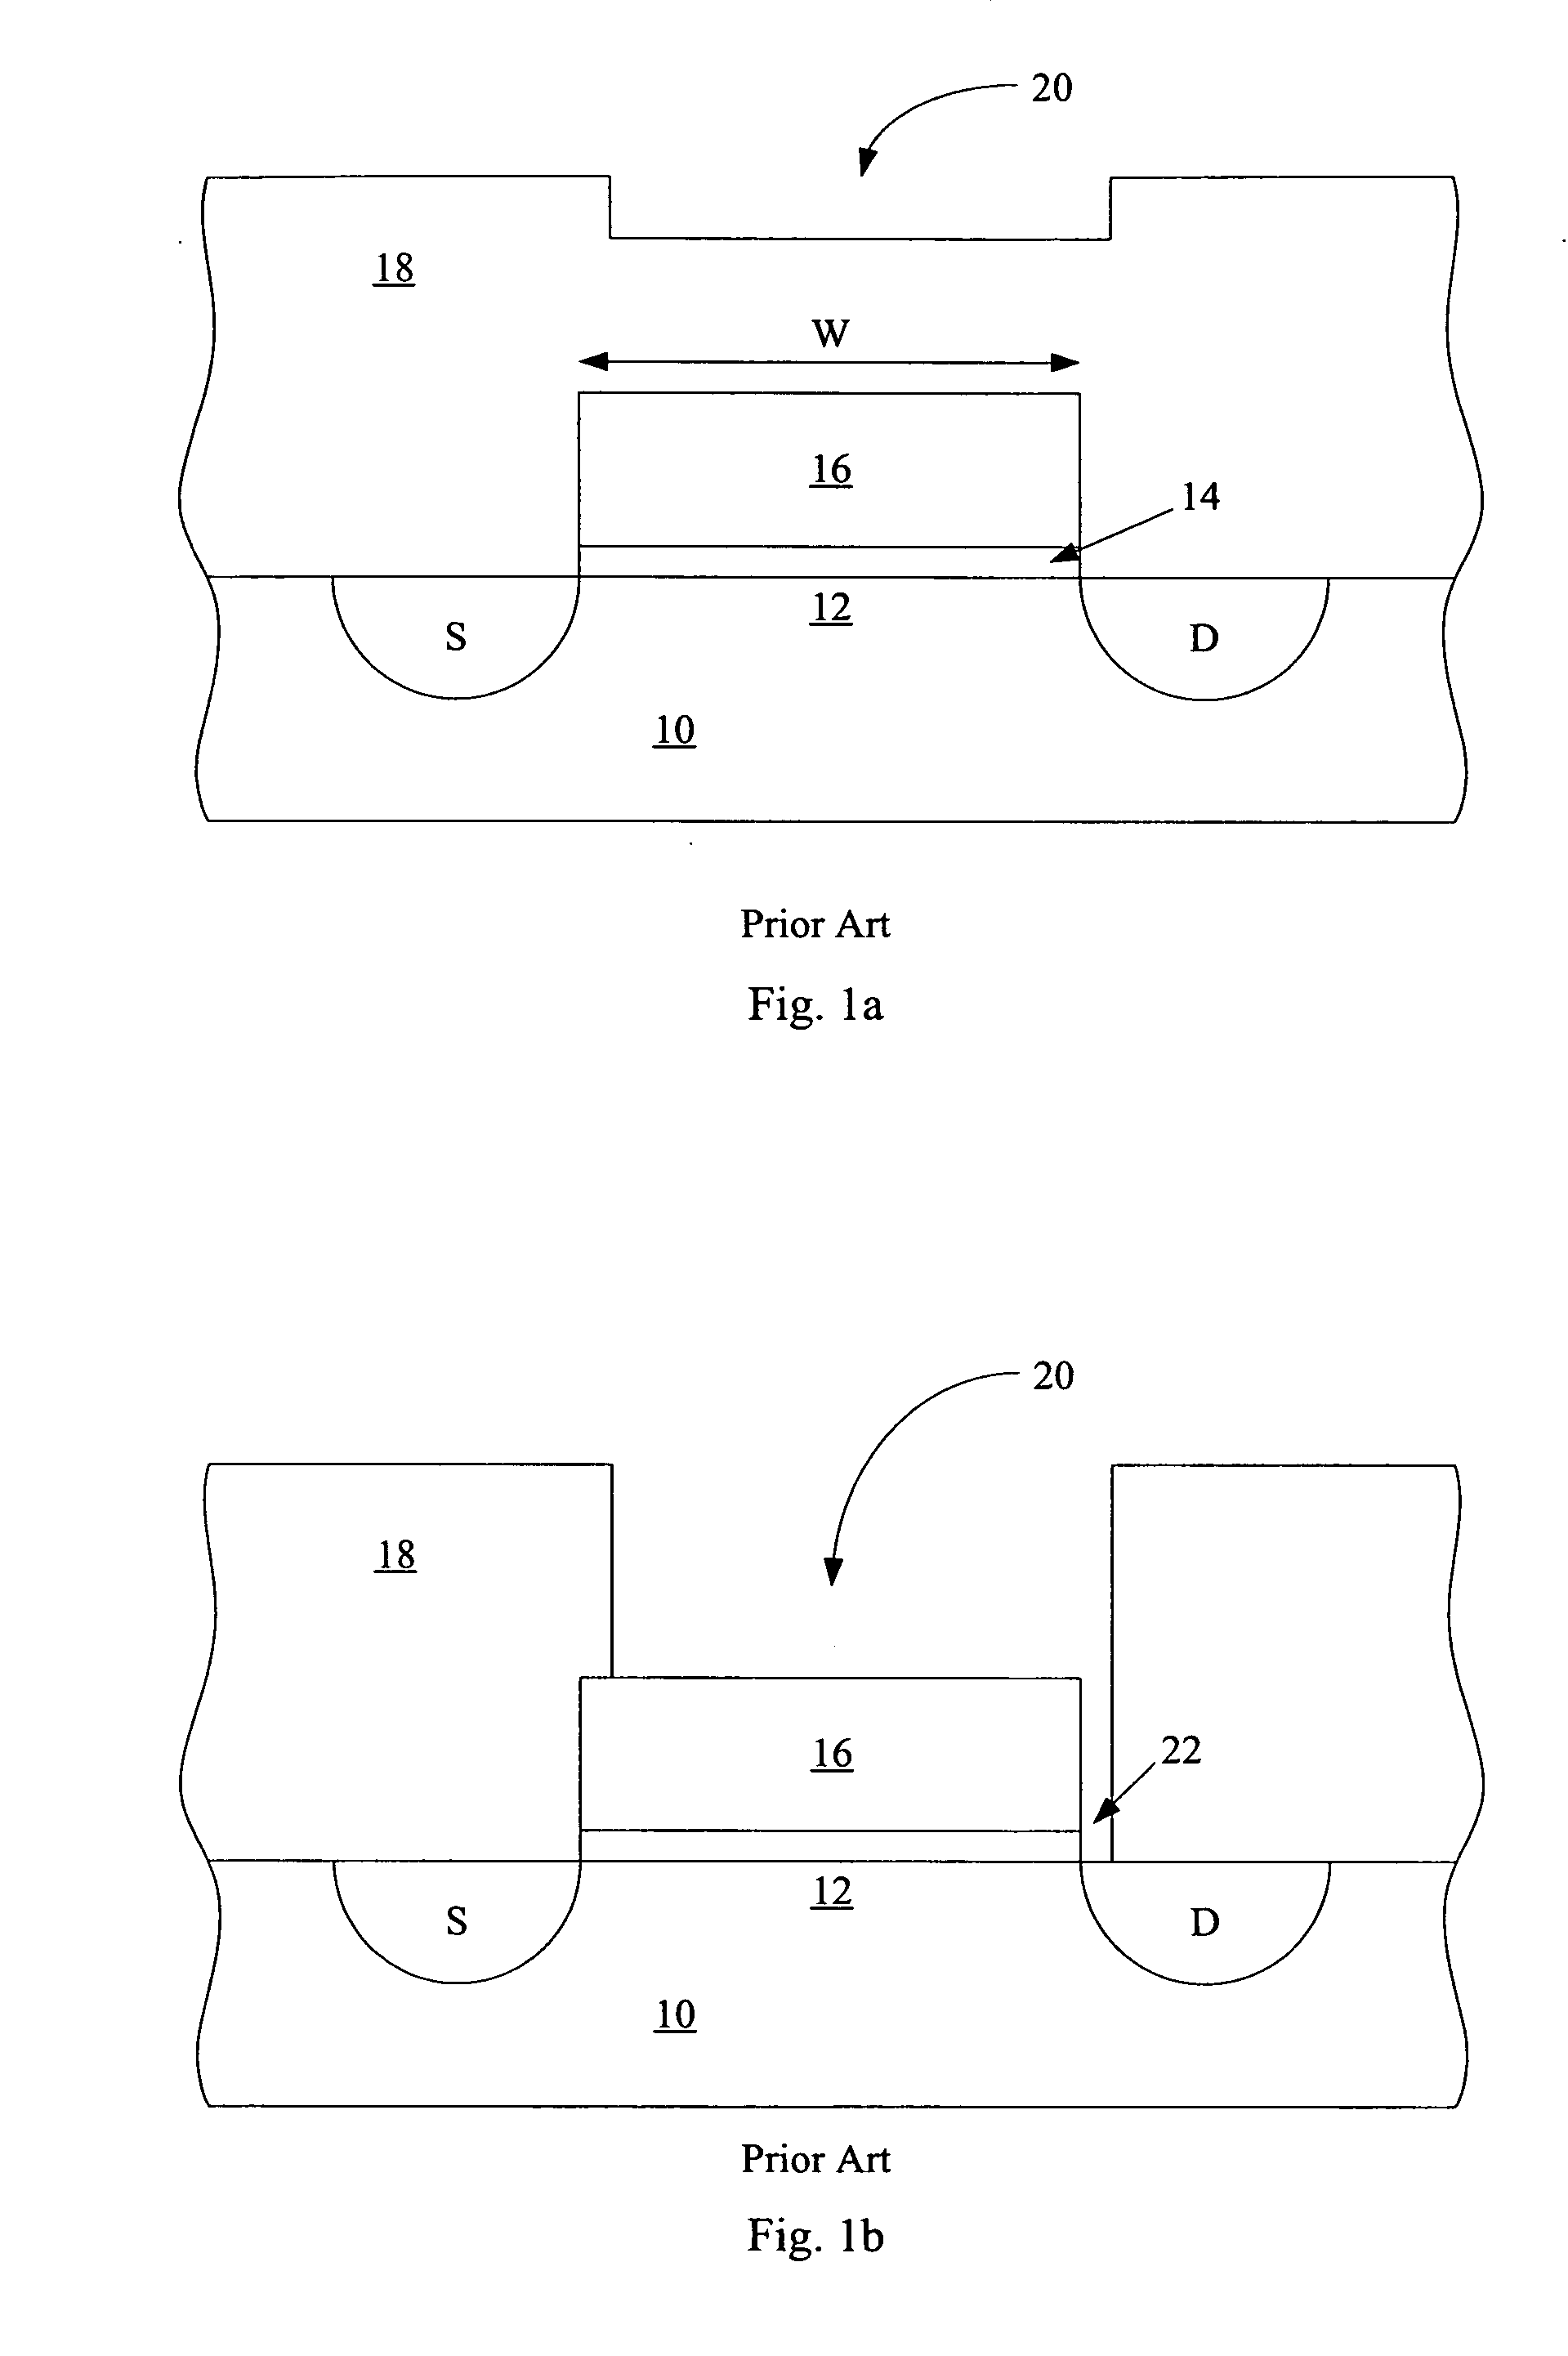 Method for reducing dielectric overetch using a dielectric etch stop at a planar surface